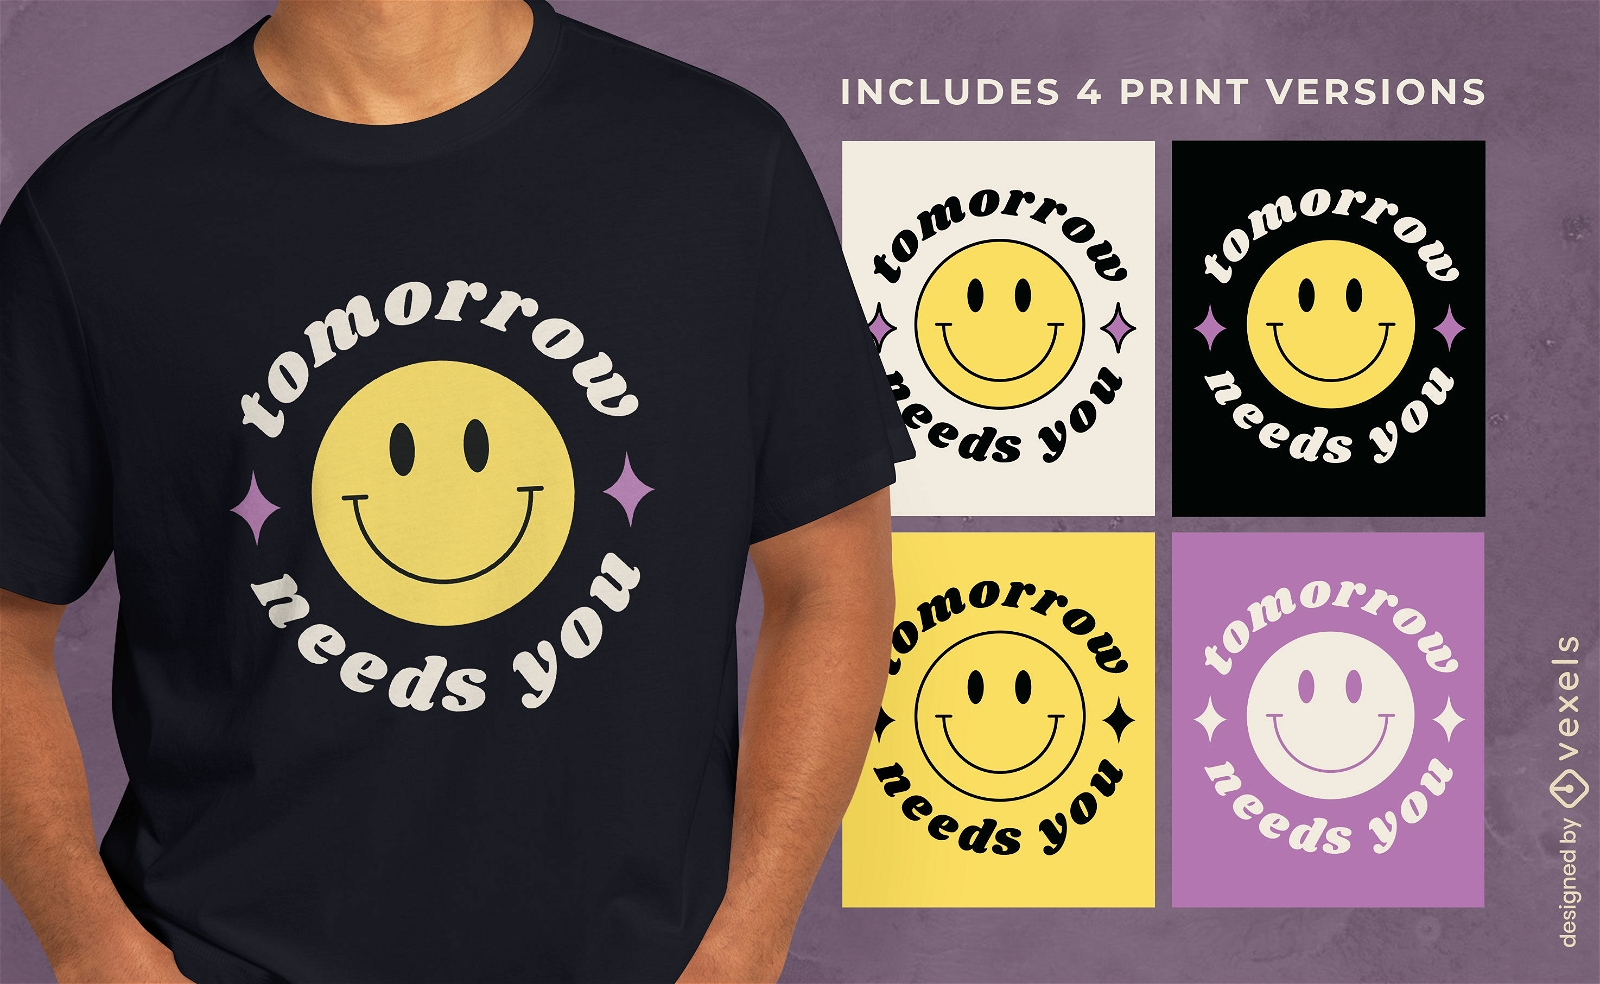 Tomorrow needs you t-shirt design multiple versions